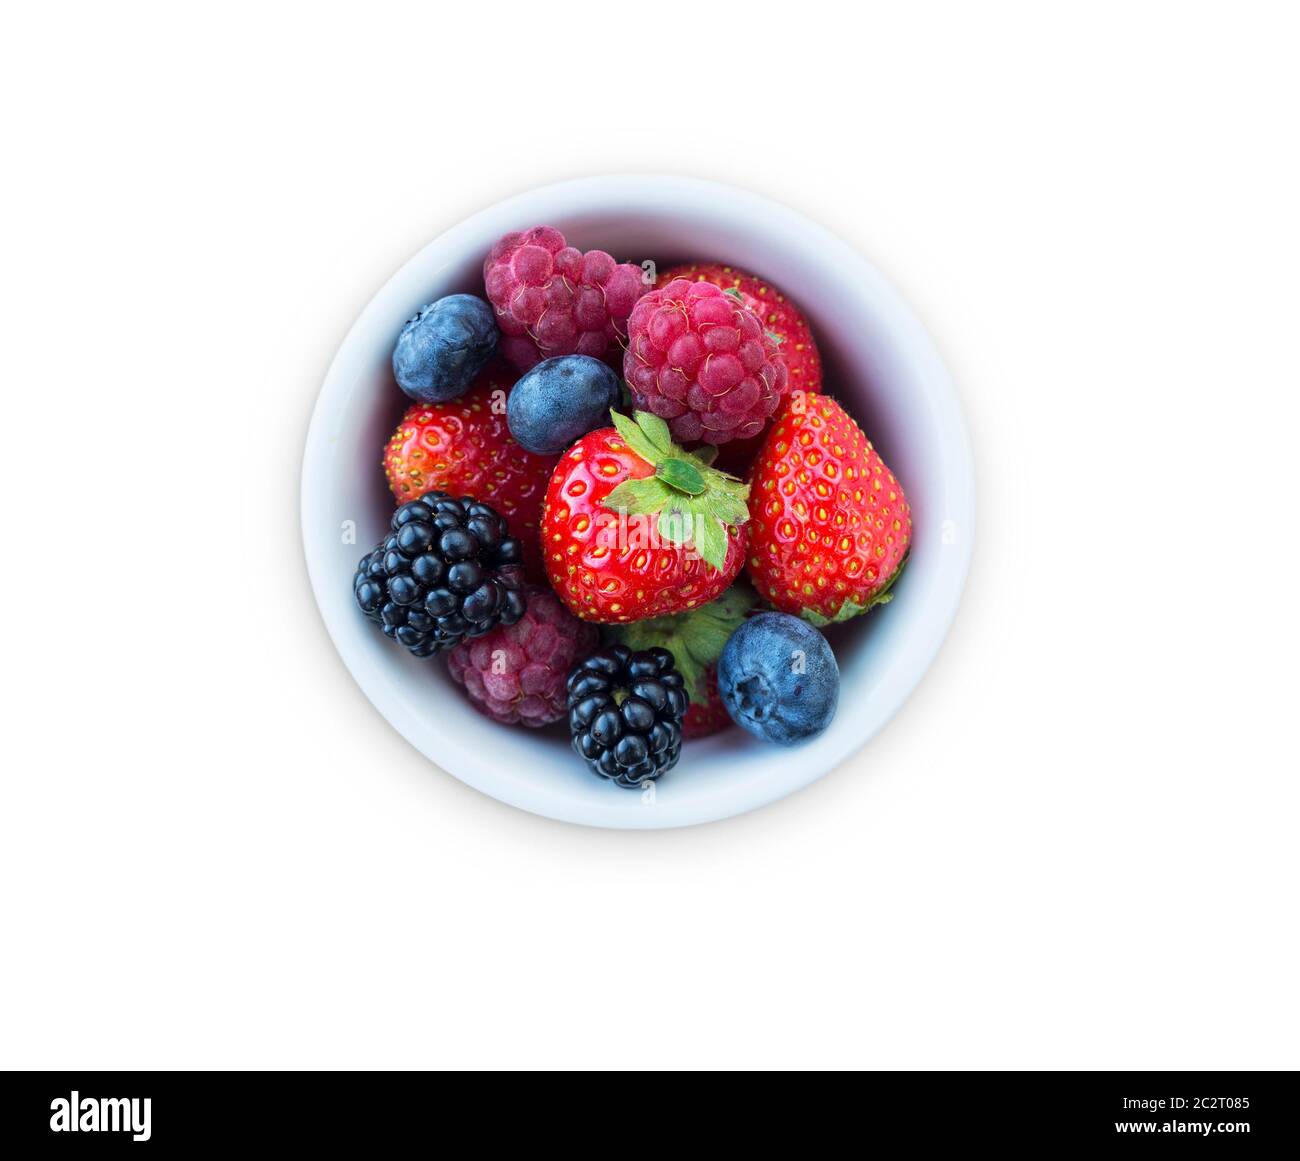 Top view. Fruits and berries in bowl isolated on white background. Ripe raspberries, strawberries, blackberries and blueberries. Background of mix fru Stock Photo